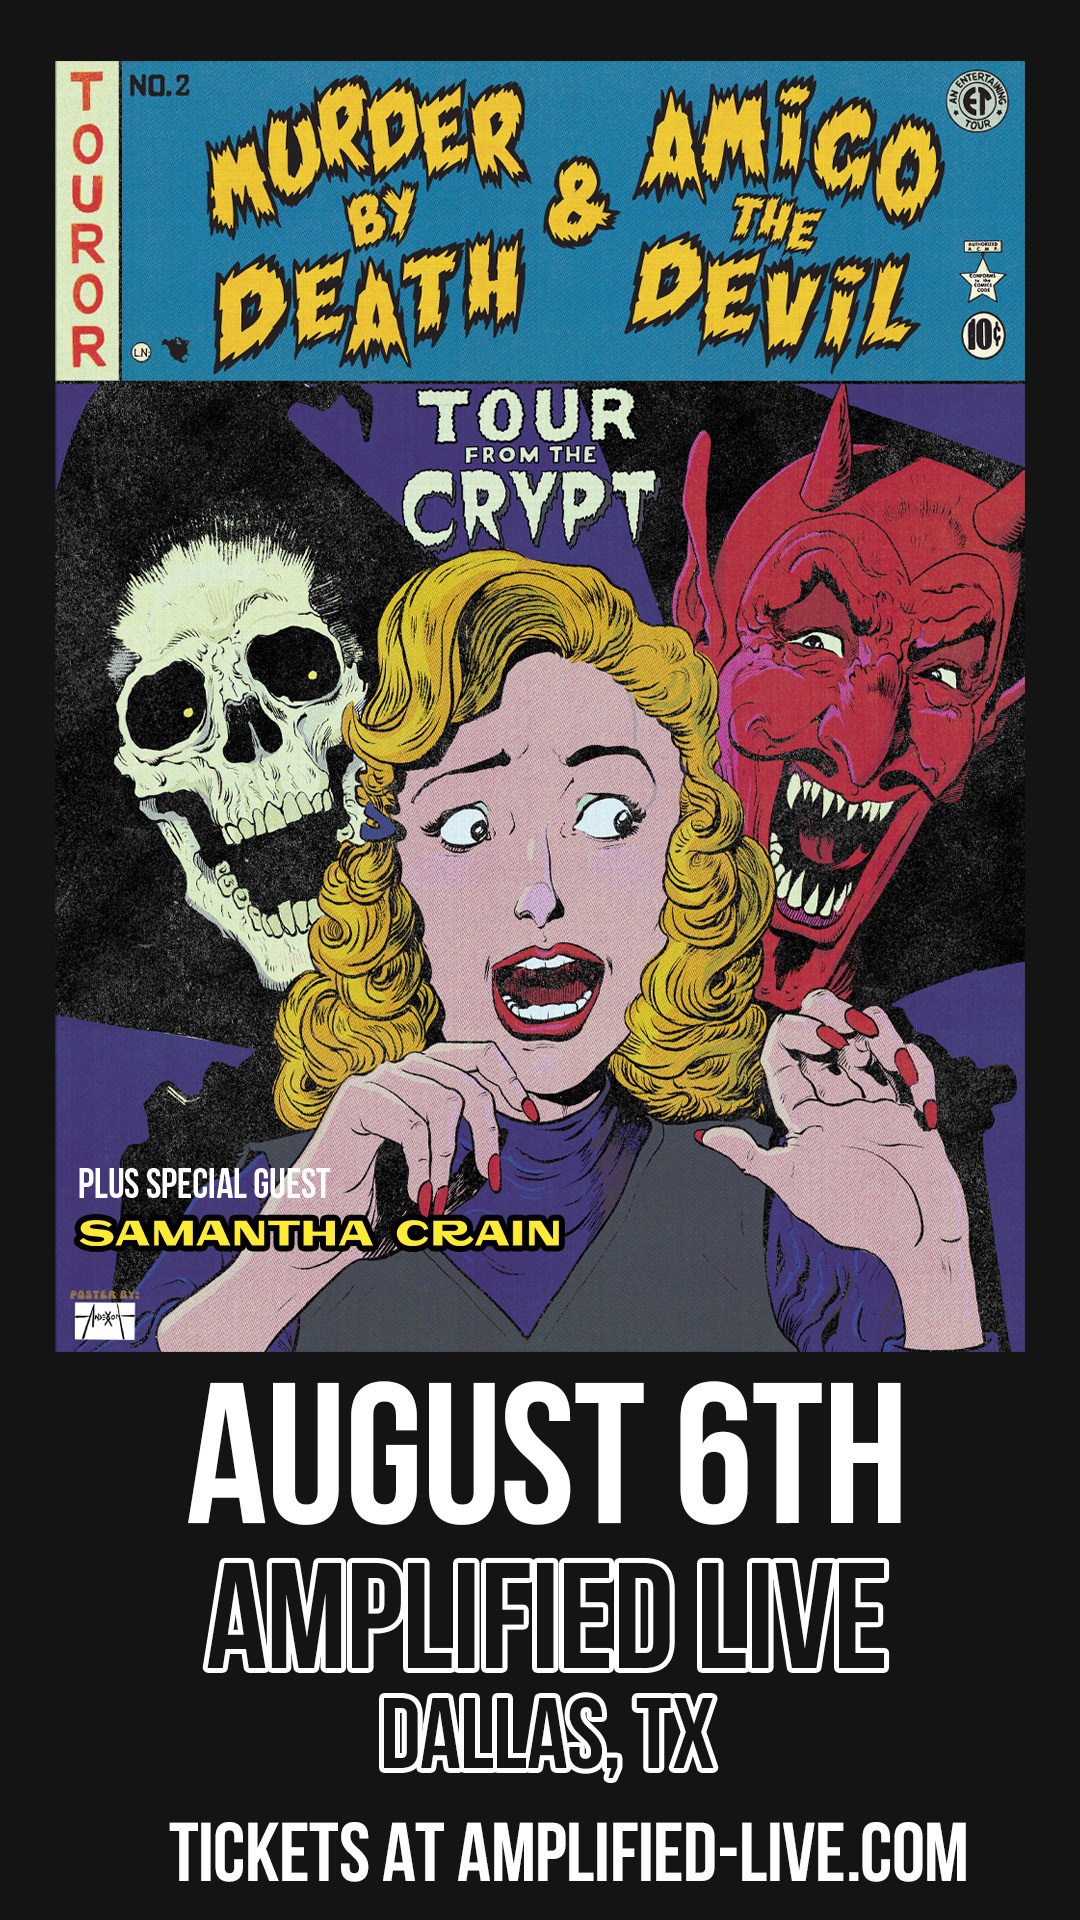 Murder By Death & Amigo The Devil: Tour From The Crypt